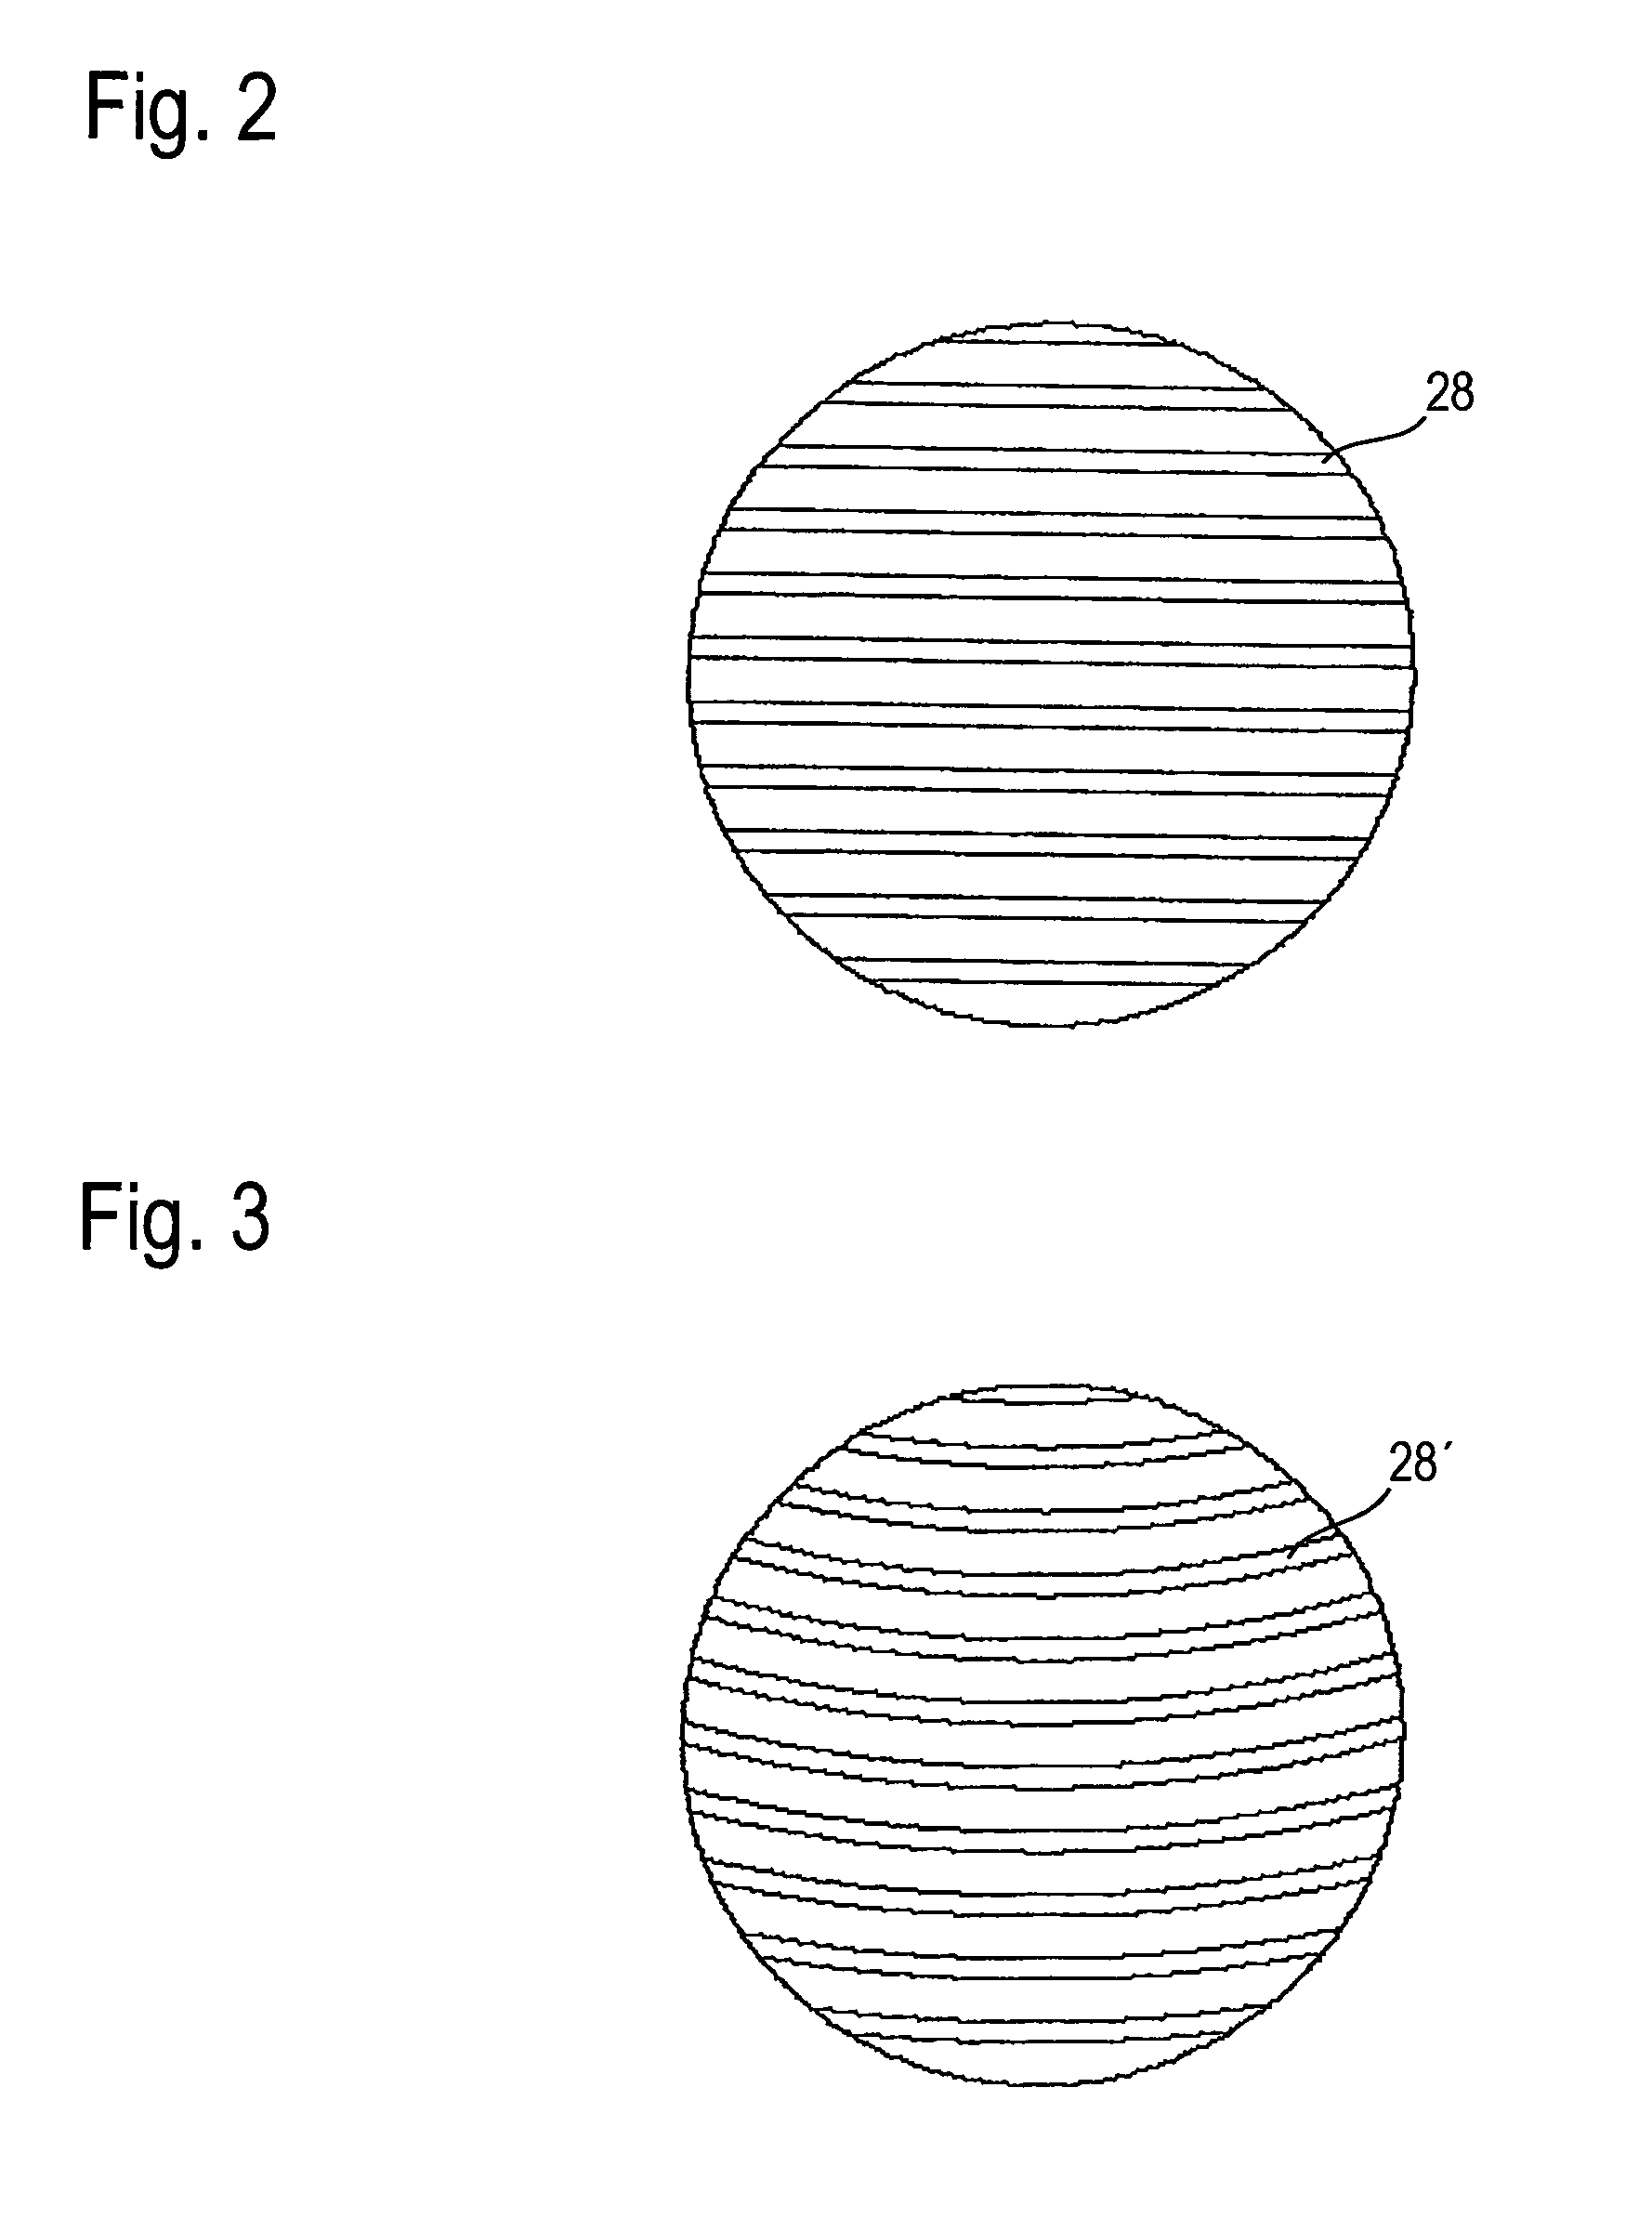 Optical sensing device for detecting ambient light in motor vehicles comprising a prism structure having a plurality of prisms designed to direct rays of a specific ambient light beam